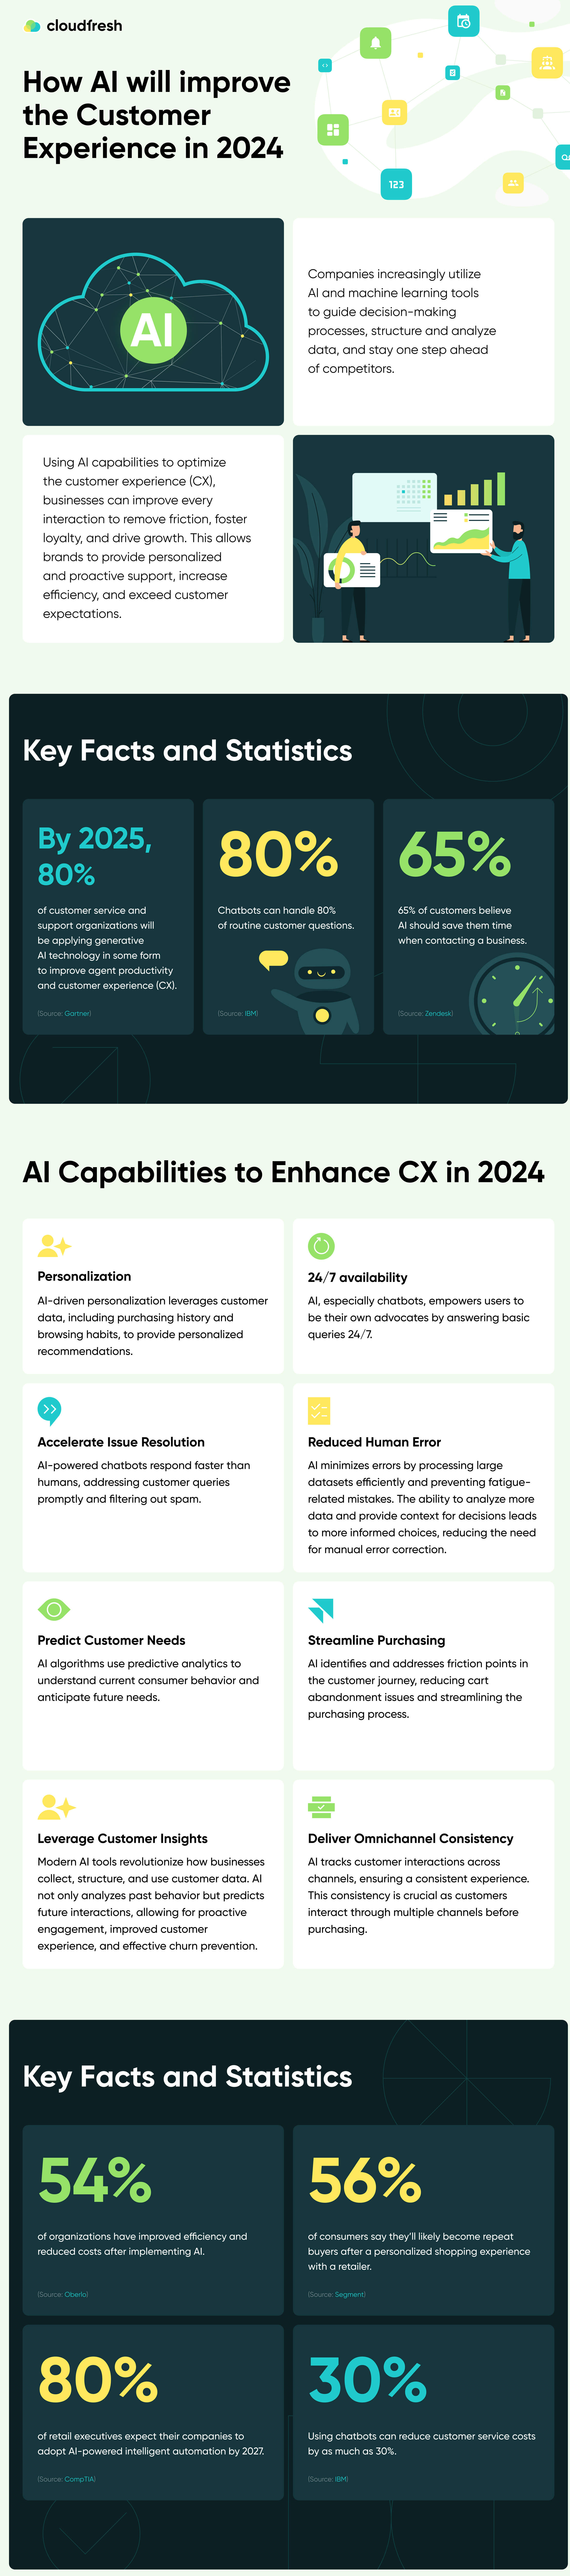 How AI will improve the Customer Experience infographics by Cloudfresh